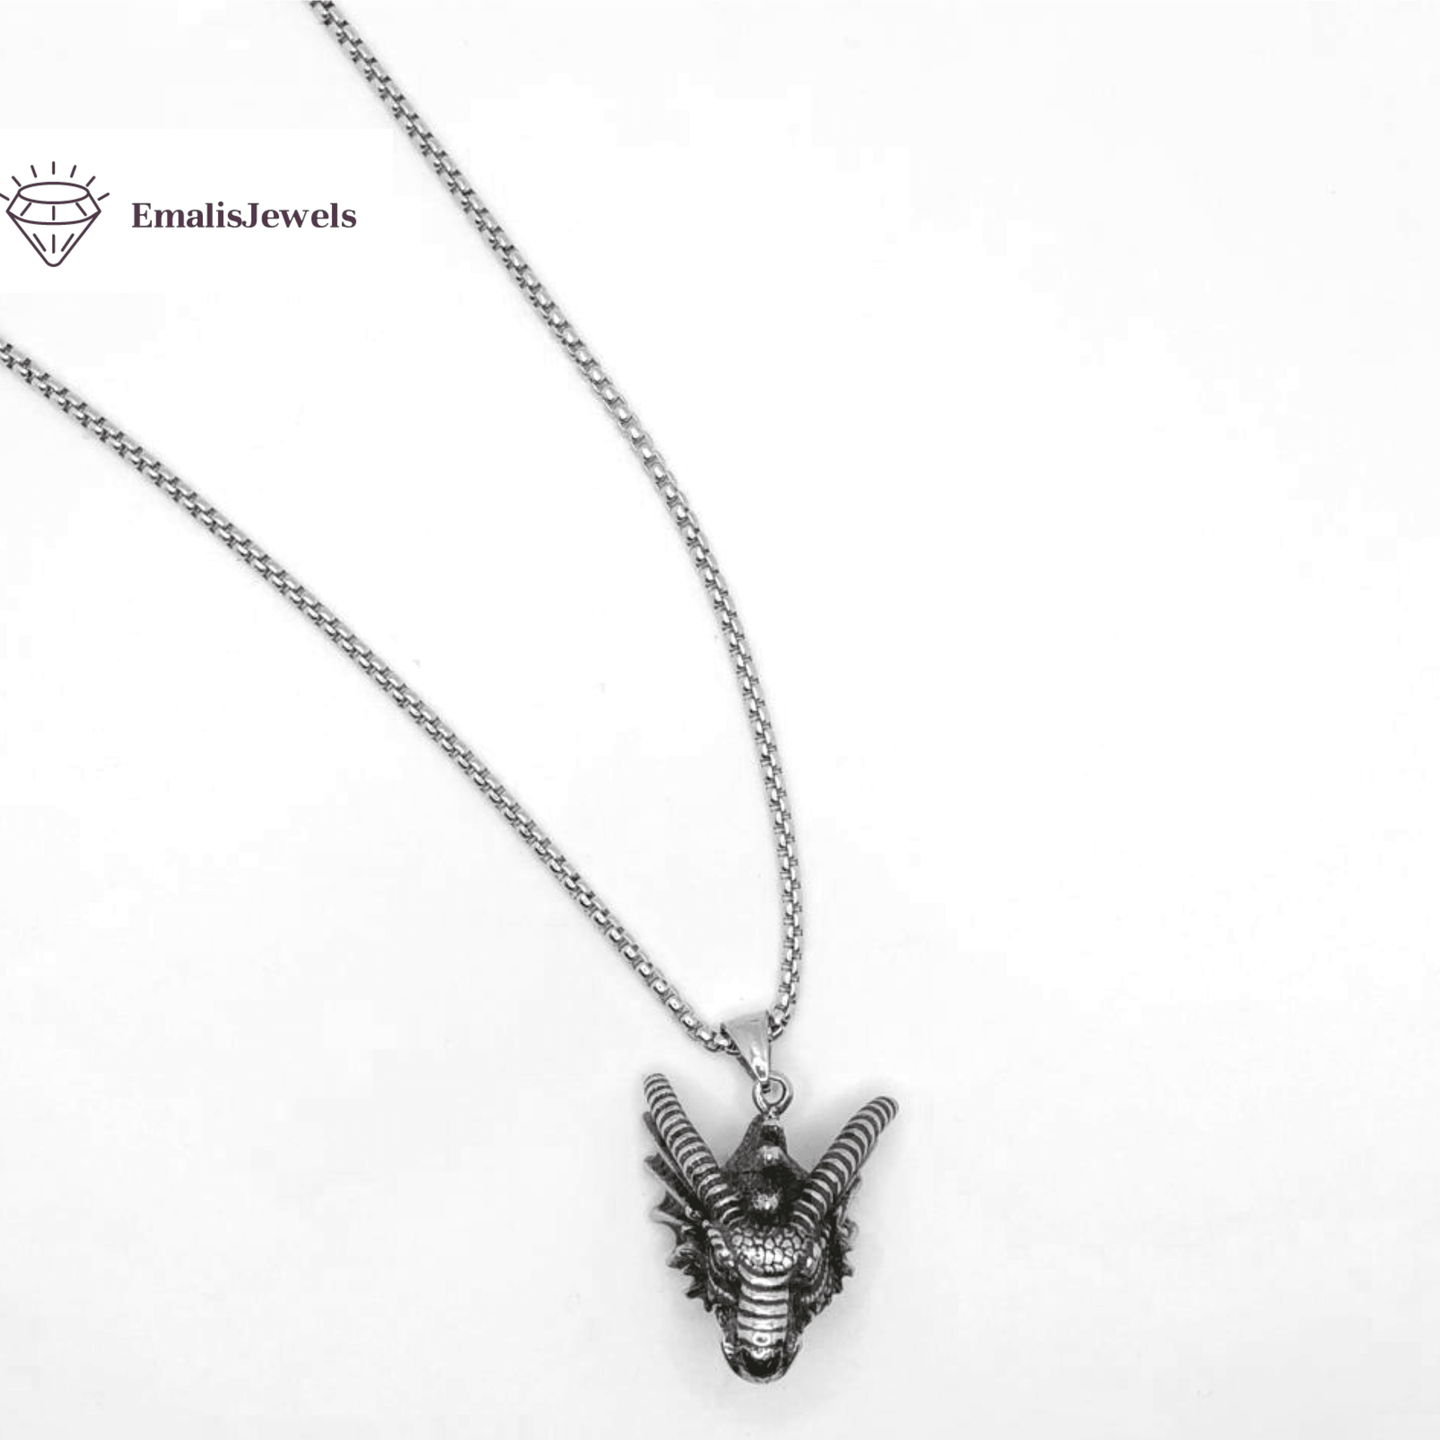 Stainless Steel Chain Necklace and Stainless Steel Dragon Pendant - PremiumBrandGoods